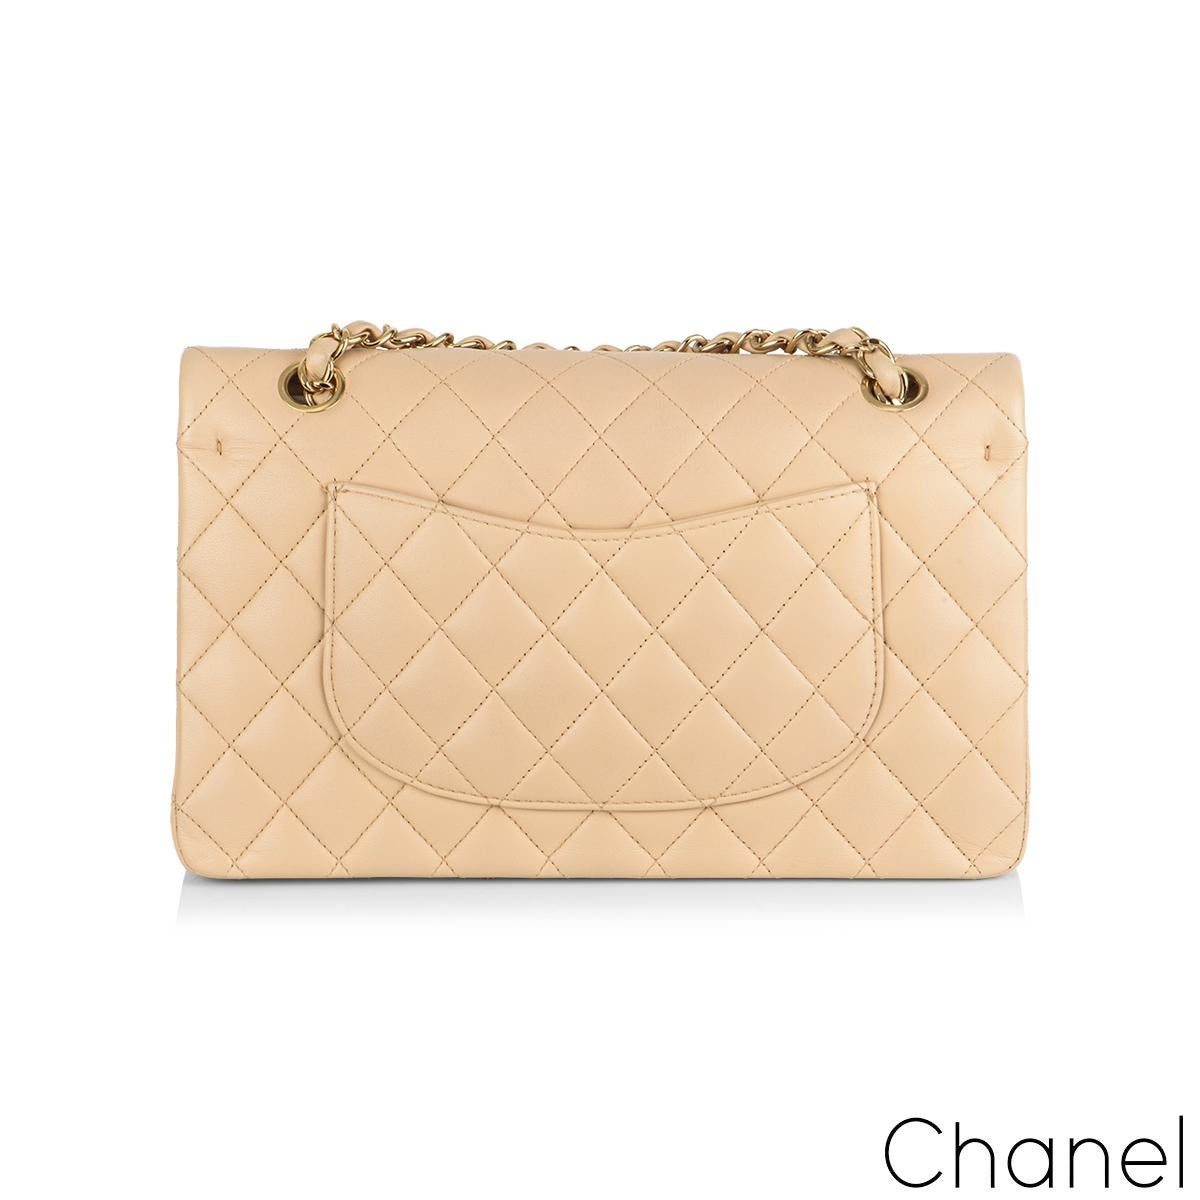 A Timeless Chanel Classic Double Flap Handbag. The exterior of this medium classic is in beige lambskin leather with gold tone hardware. It features a front flap with signature CC turnlock closure, half moon back pocket, and adjustable interwoven